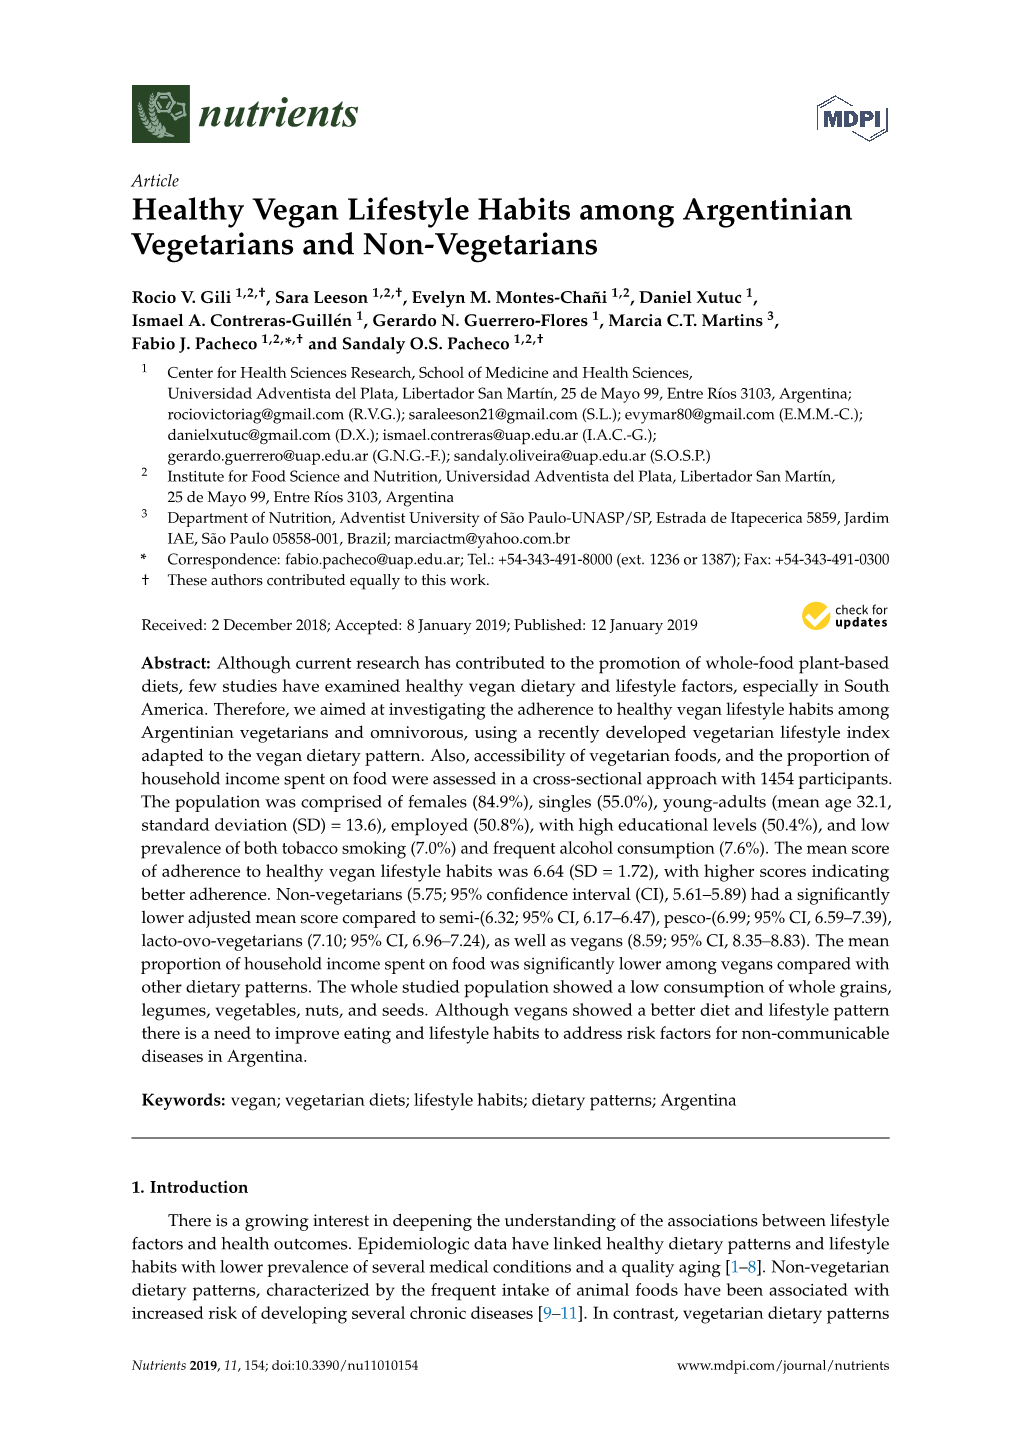 Healthy Vegan Lifestyle Habits Among Argentinian Vegetarians and Non-Vegetarians